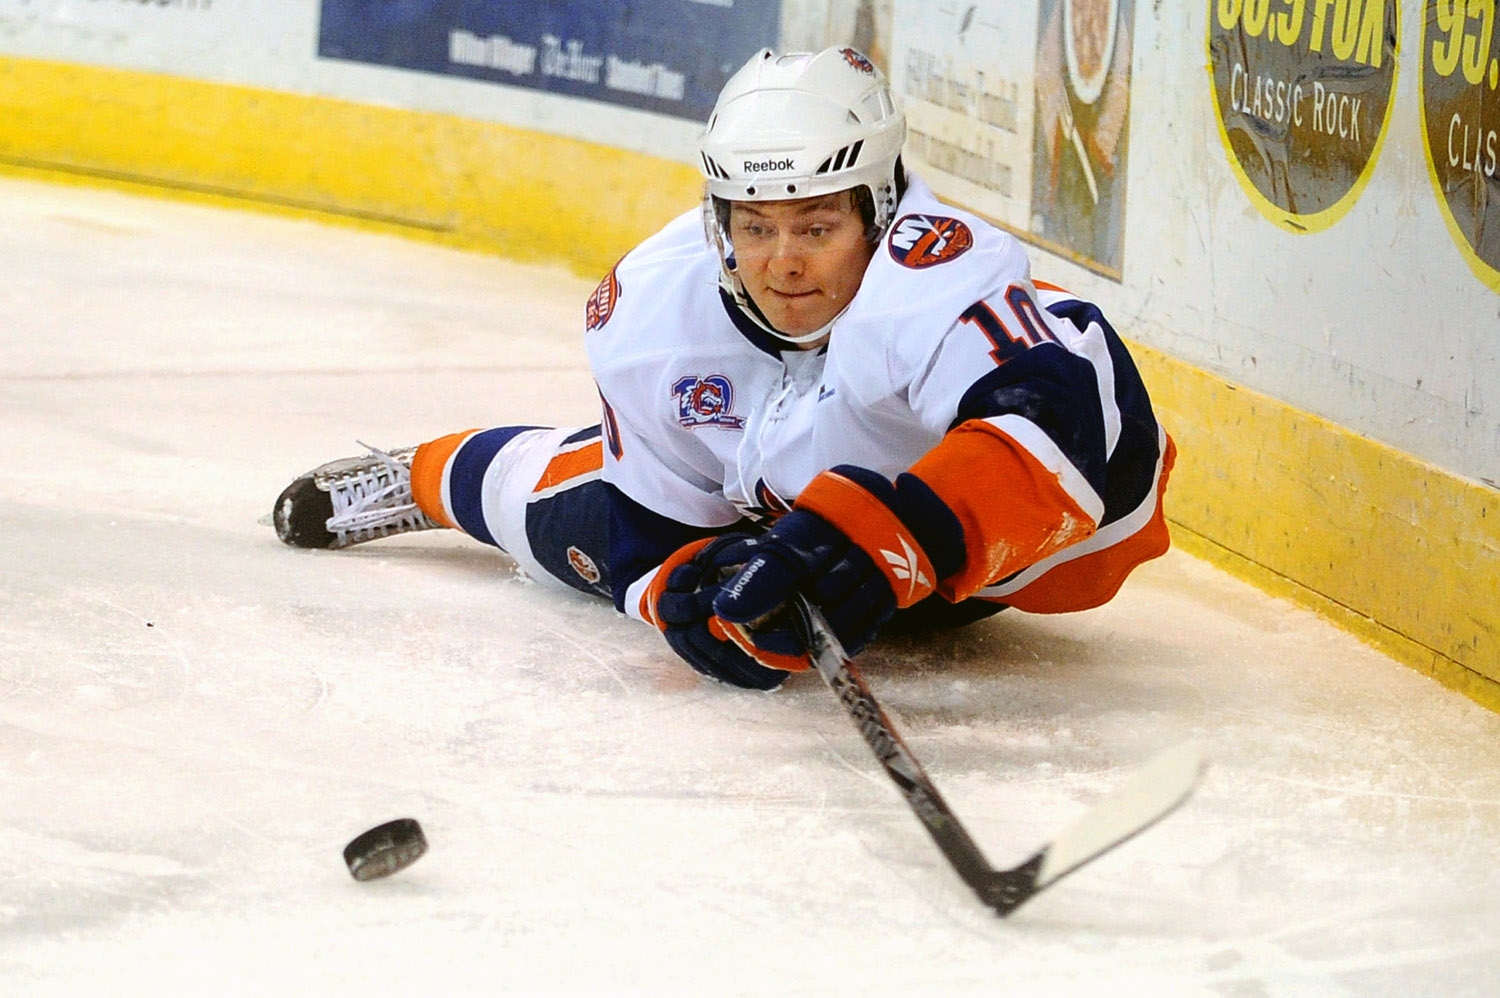  The Soundtigers' Rhett Rakhshani reaches for the puck after falling during Friday's game against the Hartford Wolf Pack at the Arena at Harbor Yard November 26, 2010. 